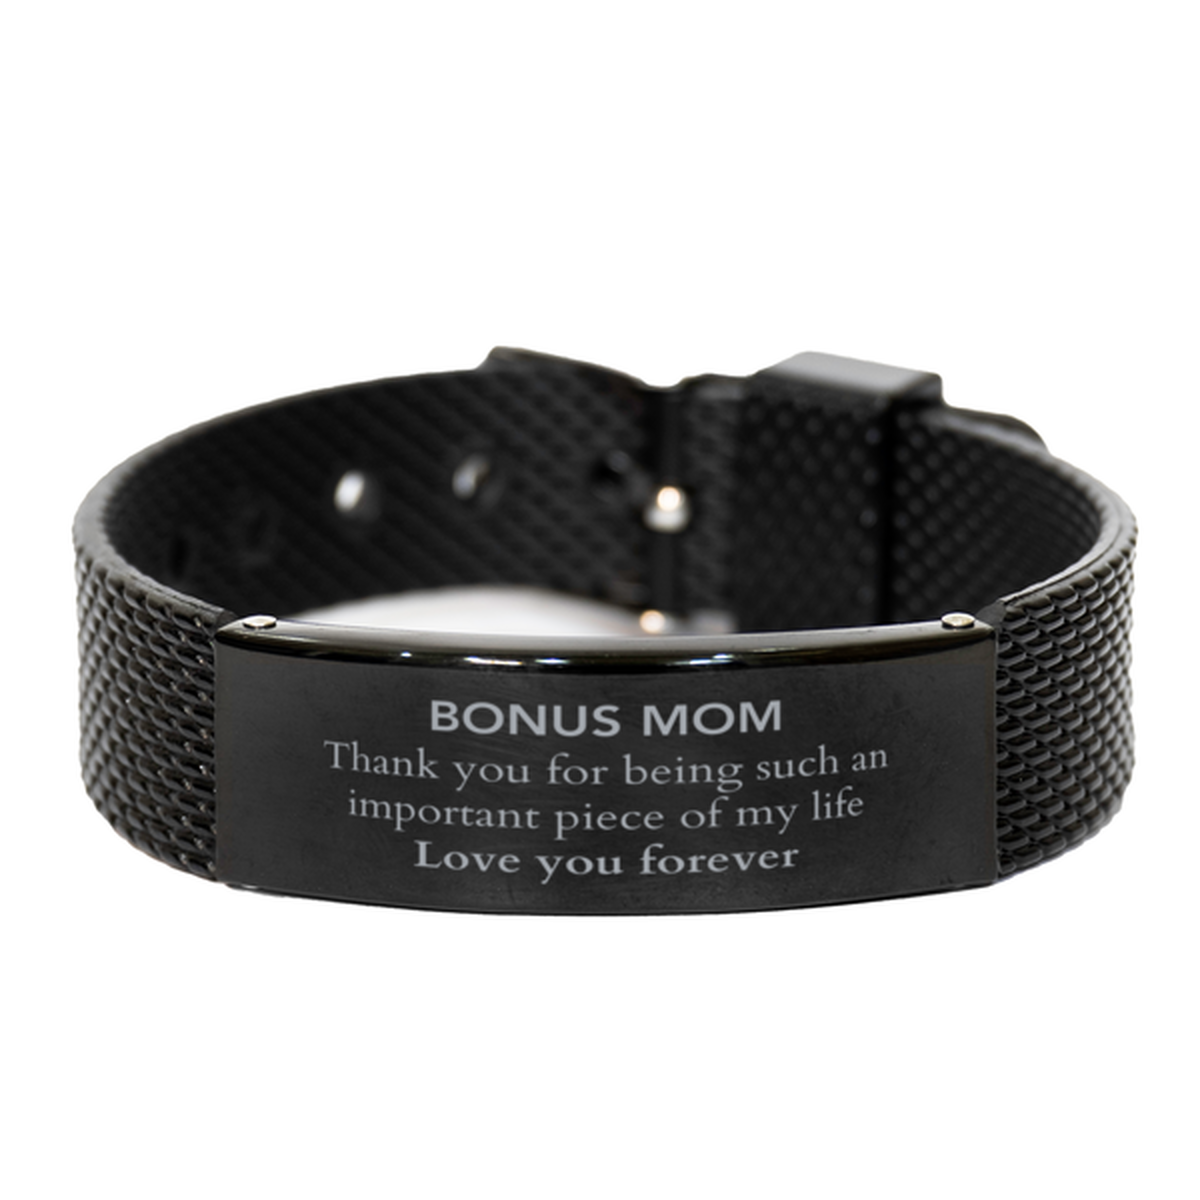 Appropriate Bonus Mom Black Shark Mesh Bracelet Epic Birthday Gifts for Bonus Mom Thank you for being such an important piece of my life Bonus Mom Christmas Mothers Fathers Day